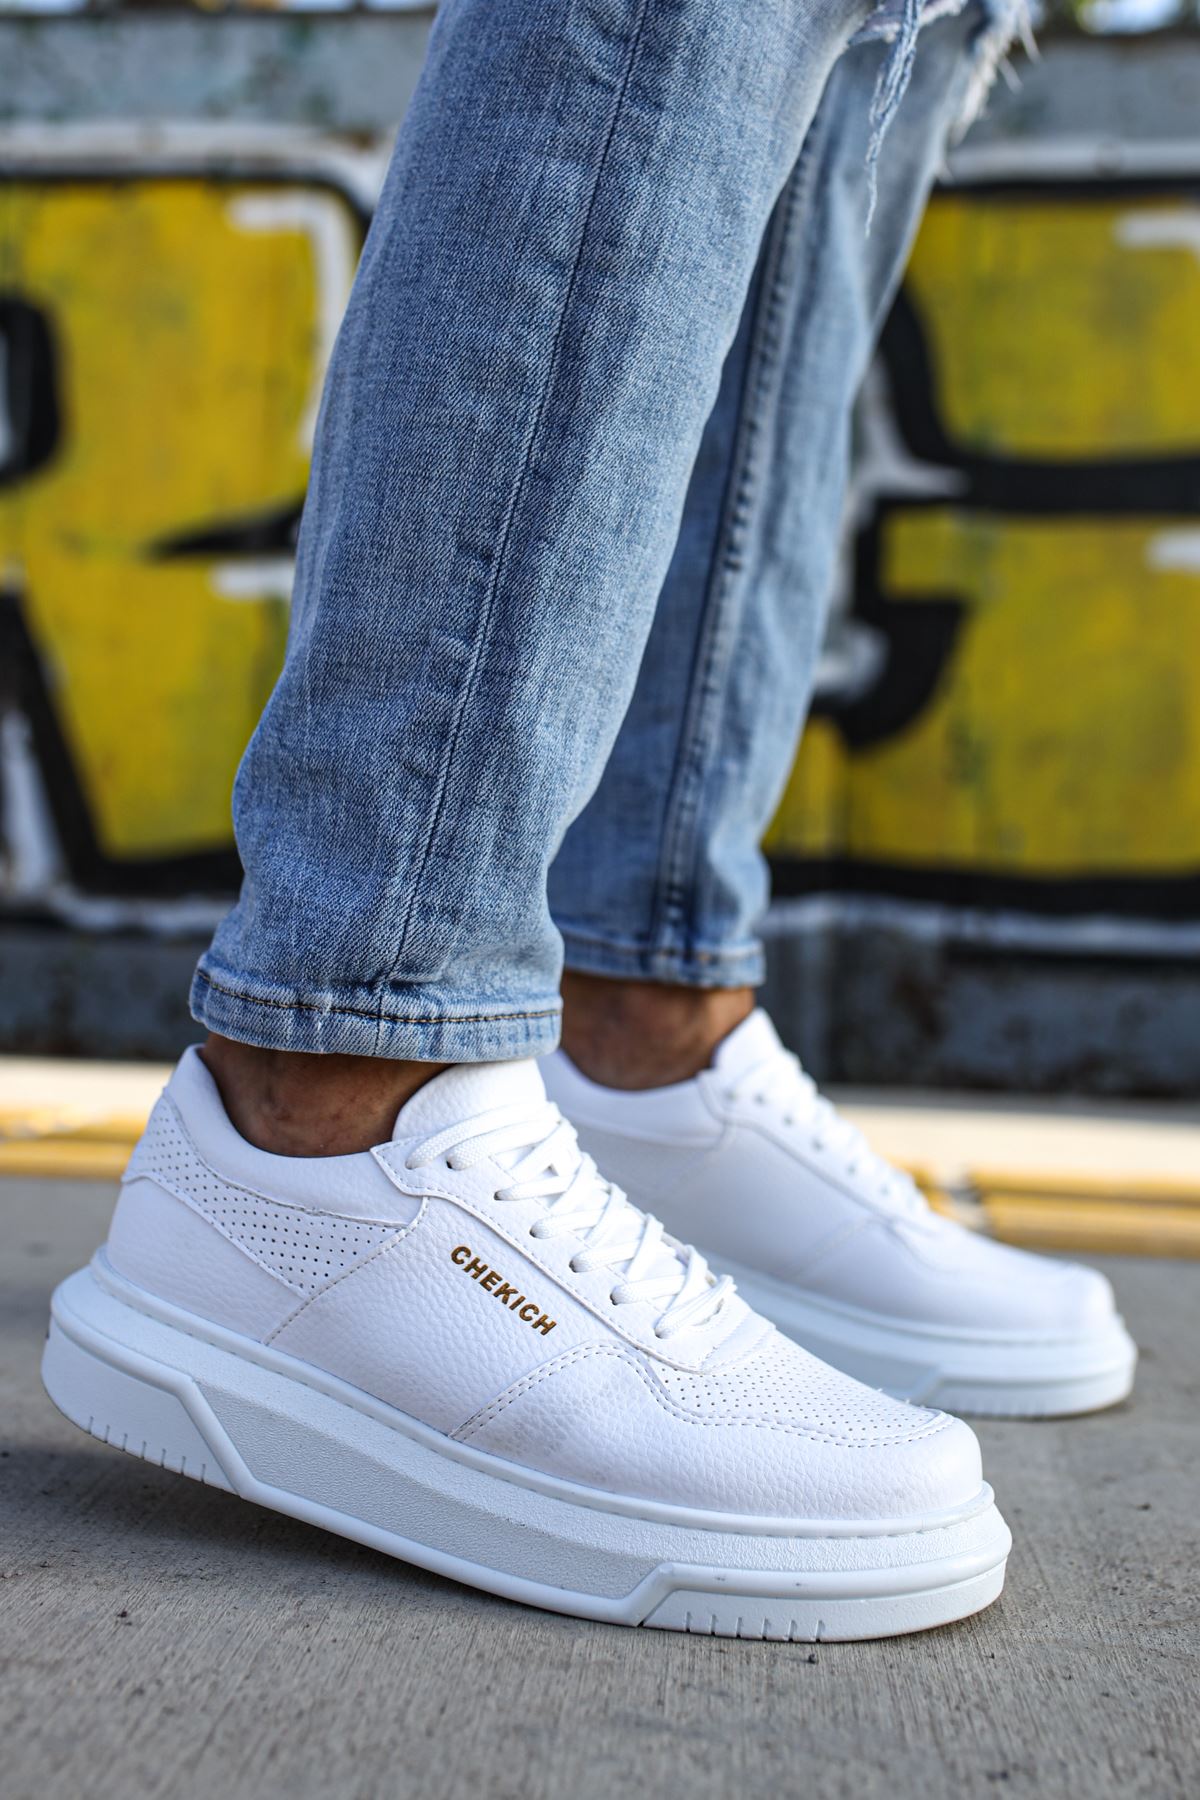 CH075 Men's Unisex Full White Casual Sneaker Sports Shoes - STREETMODE™